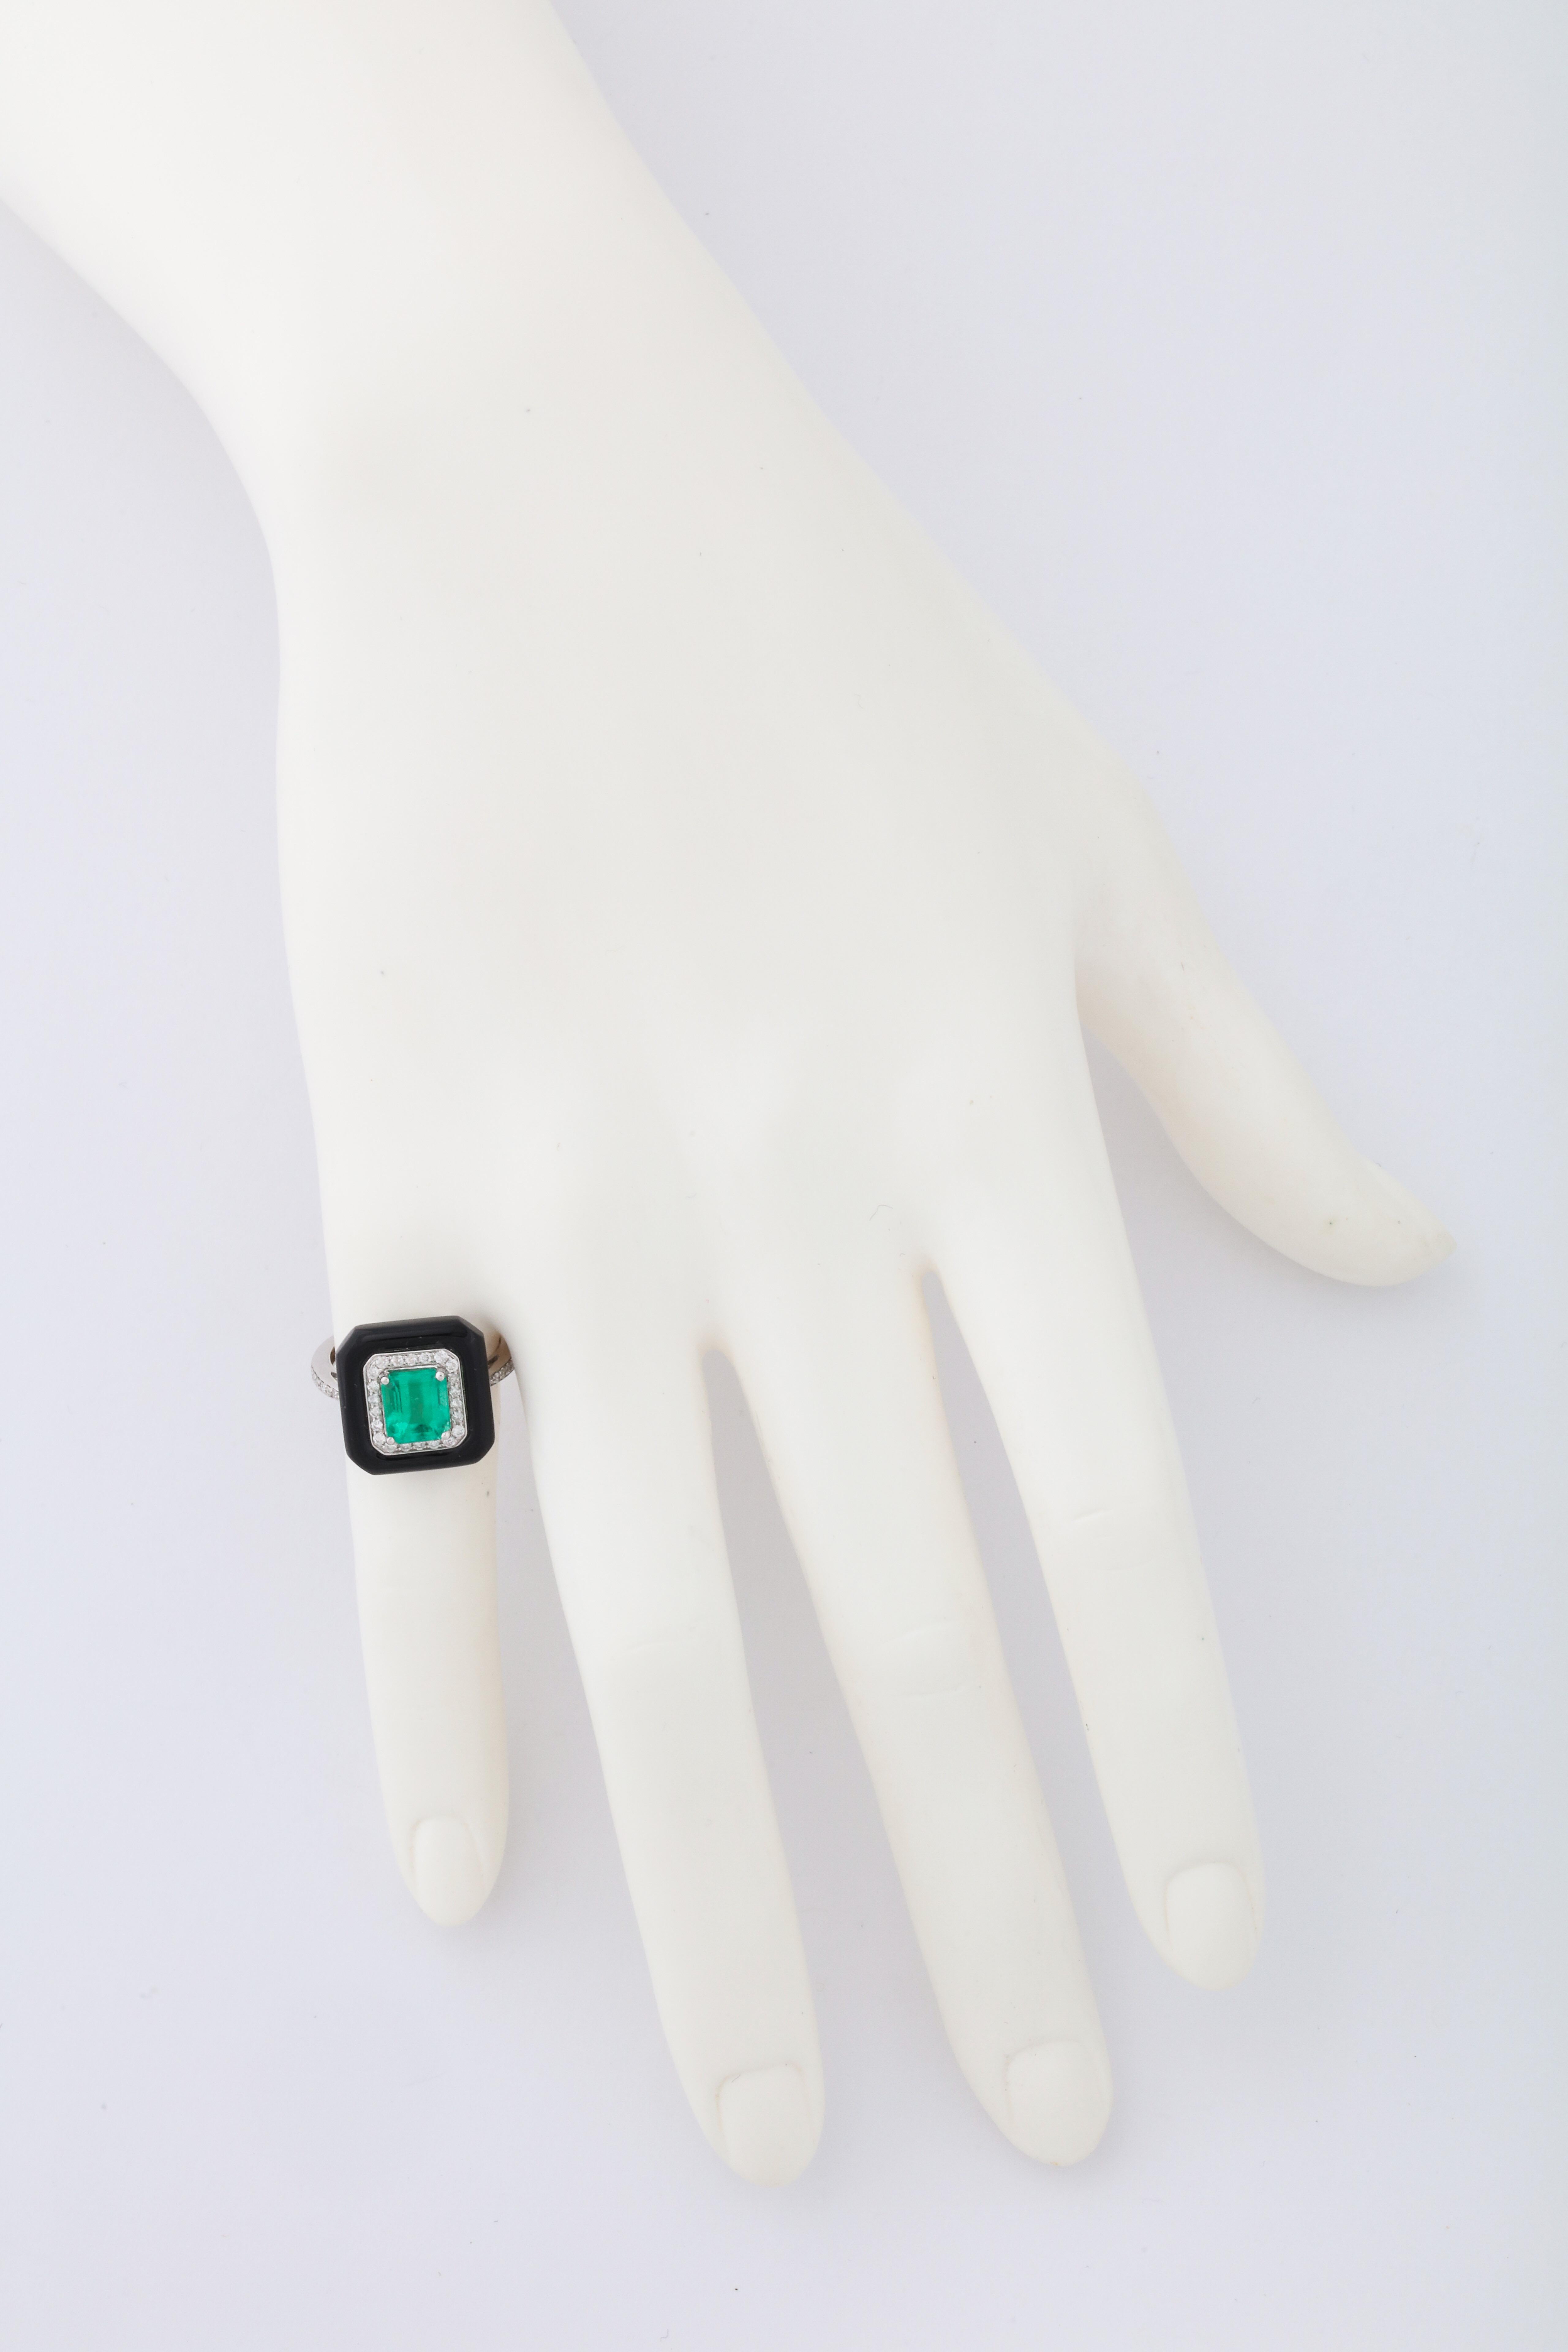 18kt white gold, custom cut black agate, emerald (app. 1.50cts) and diamond ring.  The contrasting colors in this ring take their inspiration from the Art Deco period, while the bright green emerald catches the eye.  Easy to wear and unique in it's